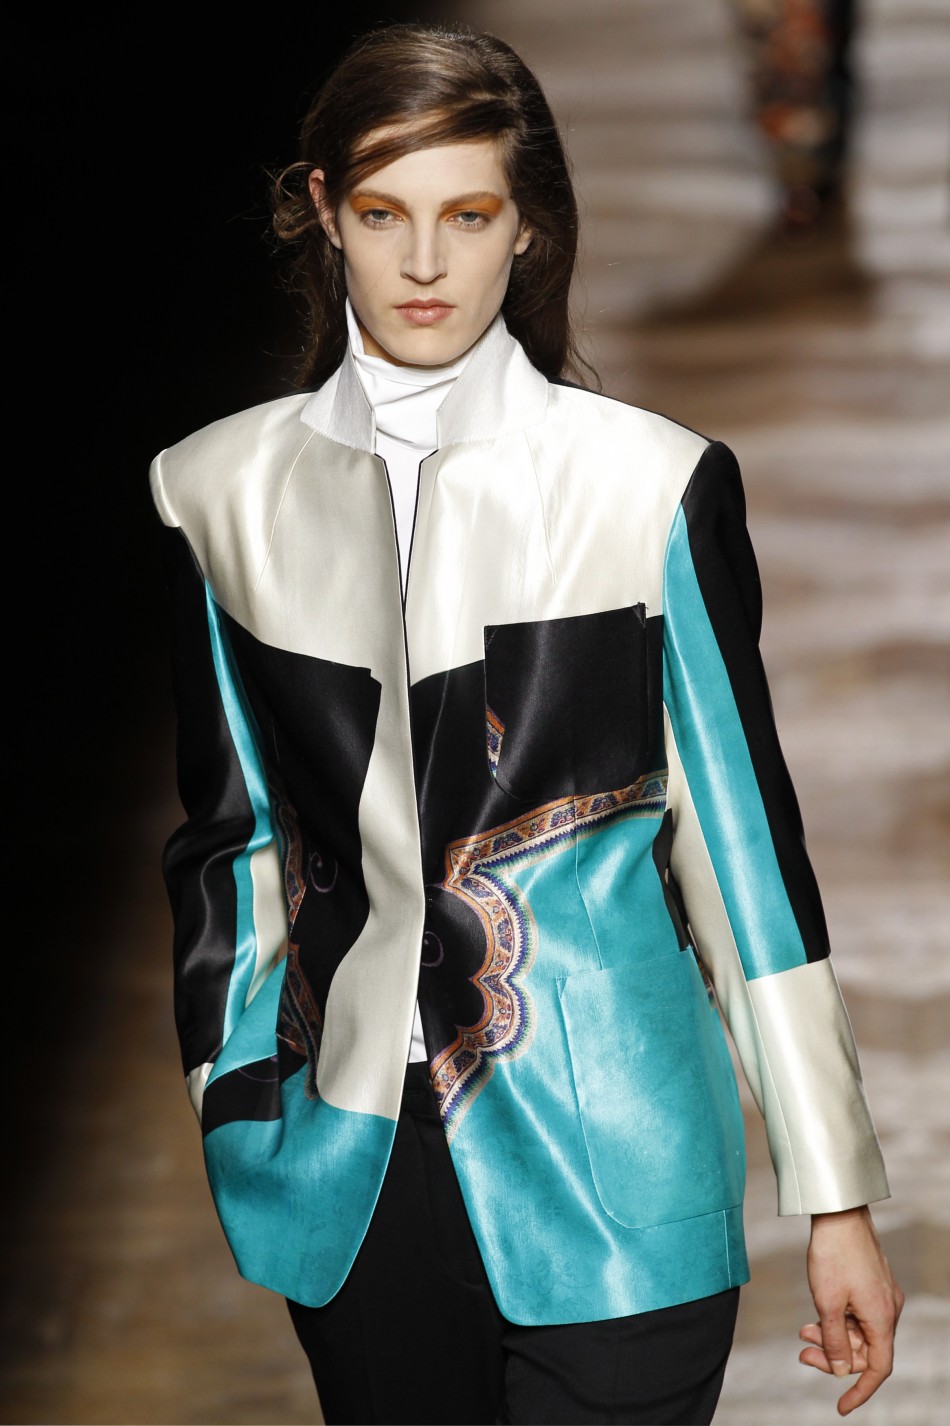 Dries Van Noten Looks to the East for Paris Fashion Week Collection